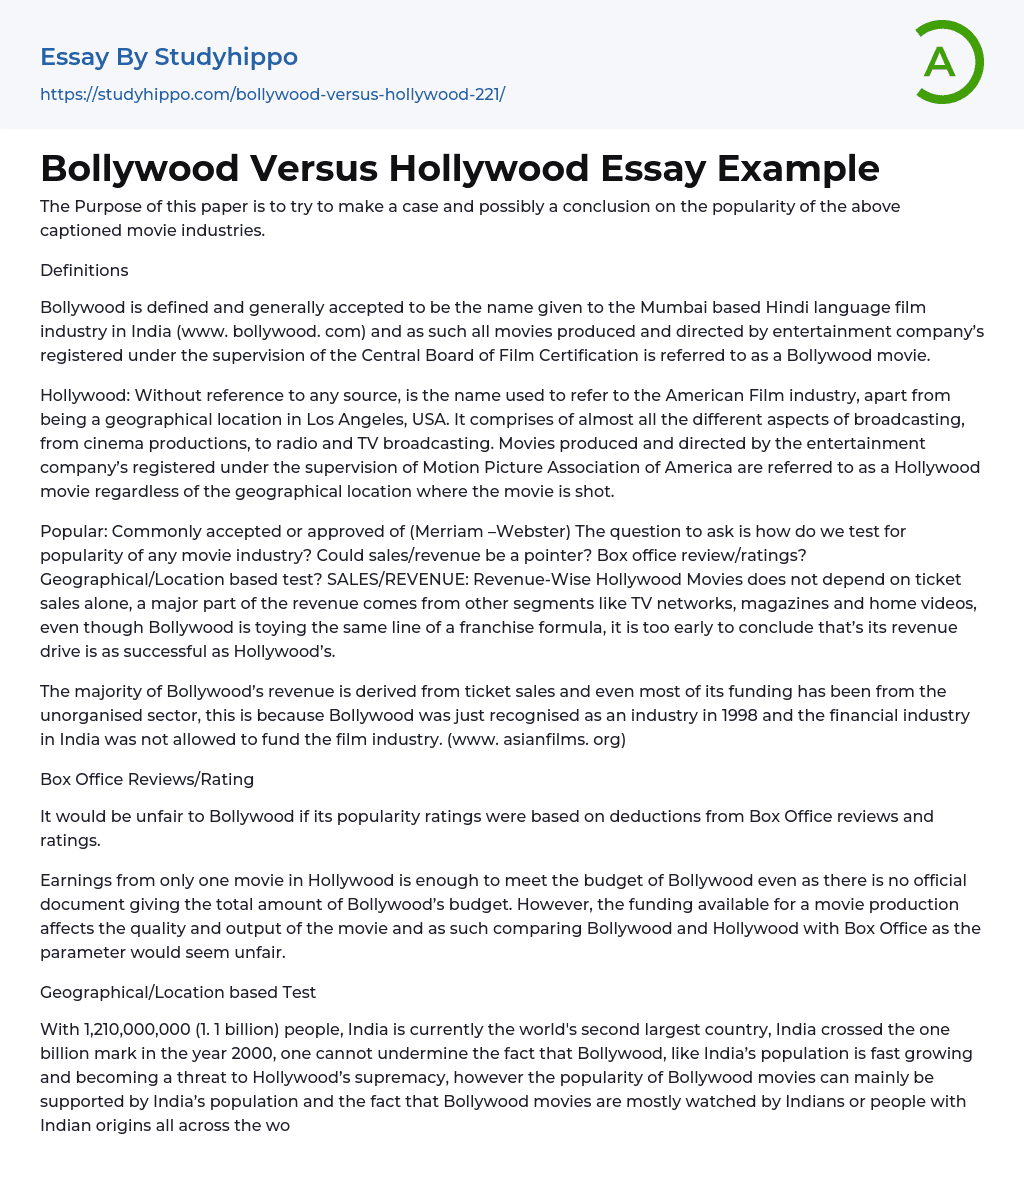 Bollywood Versus Hollywood Essay Example